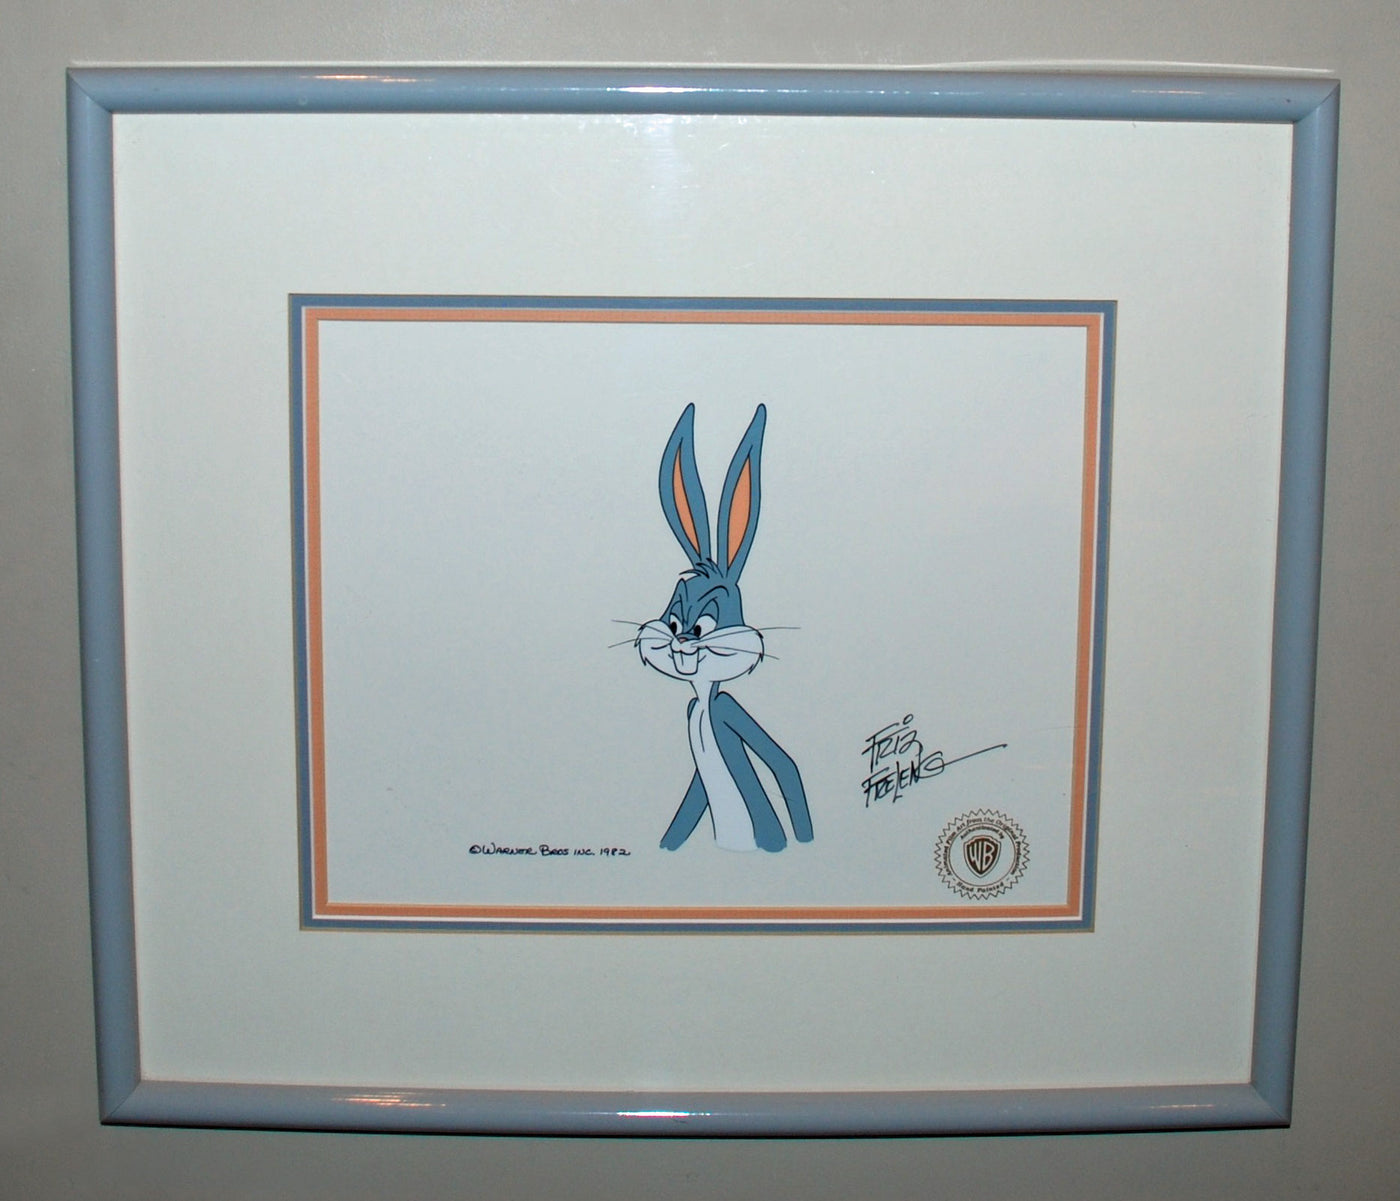 Original Warner Brothers Production Cel Featuring Bugs Bunny, Signed by Friz Freleng